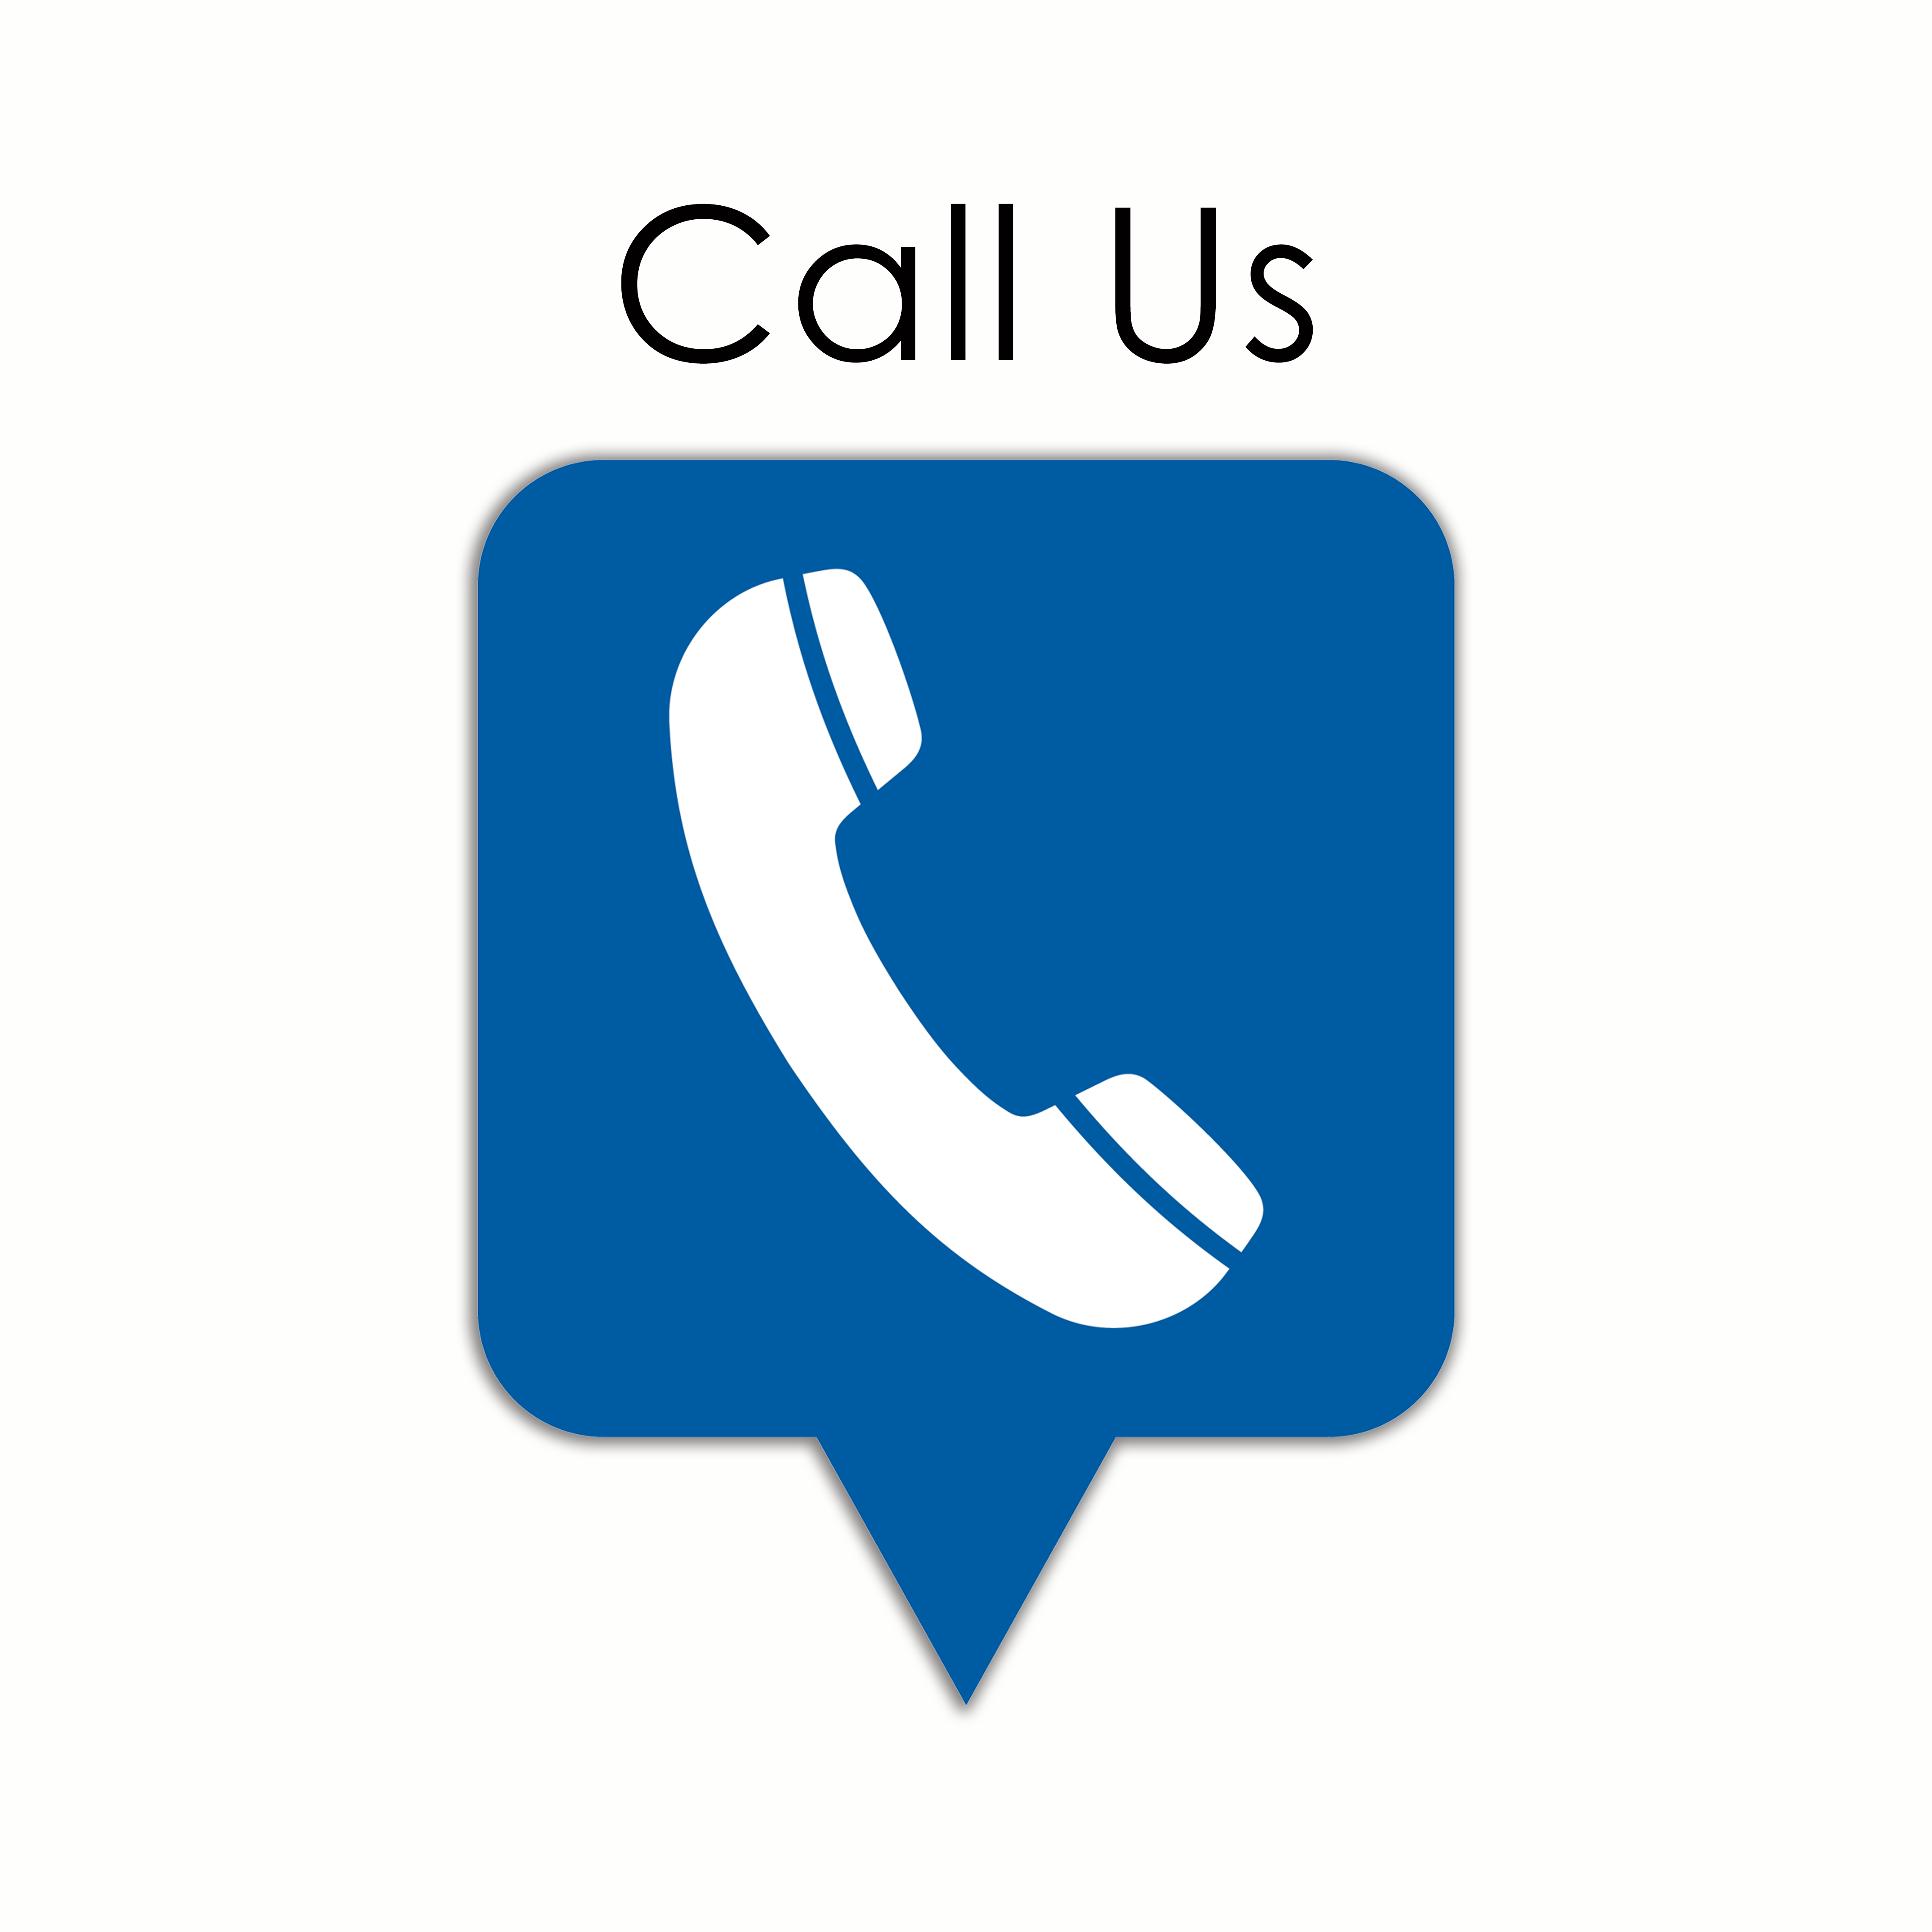 Call us now. Call us. Call us logo. Call us Forgotten logo. Call us today for a logo.